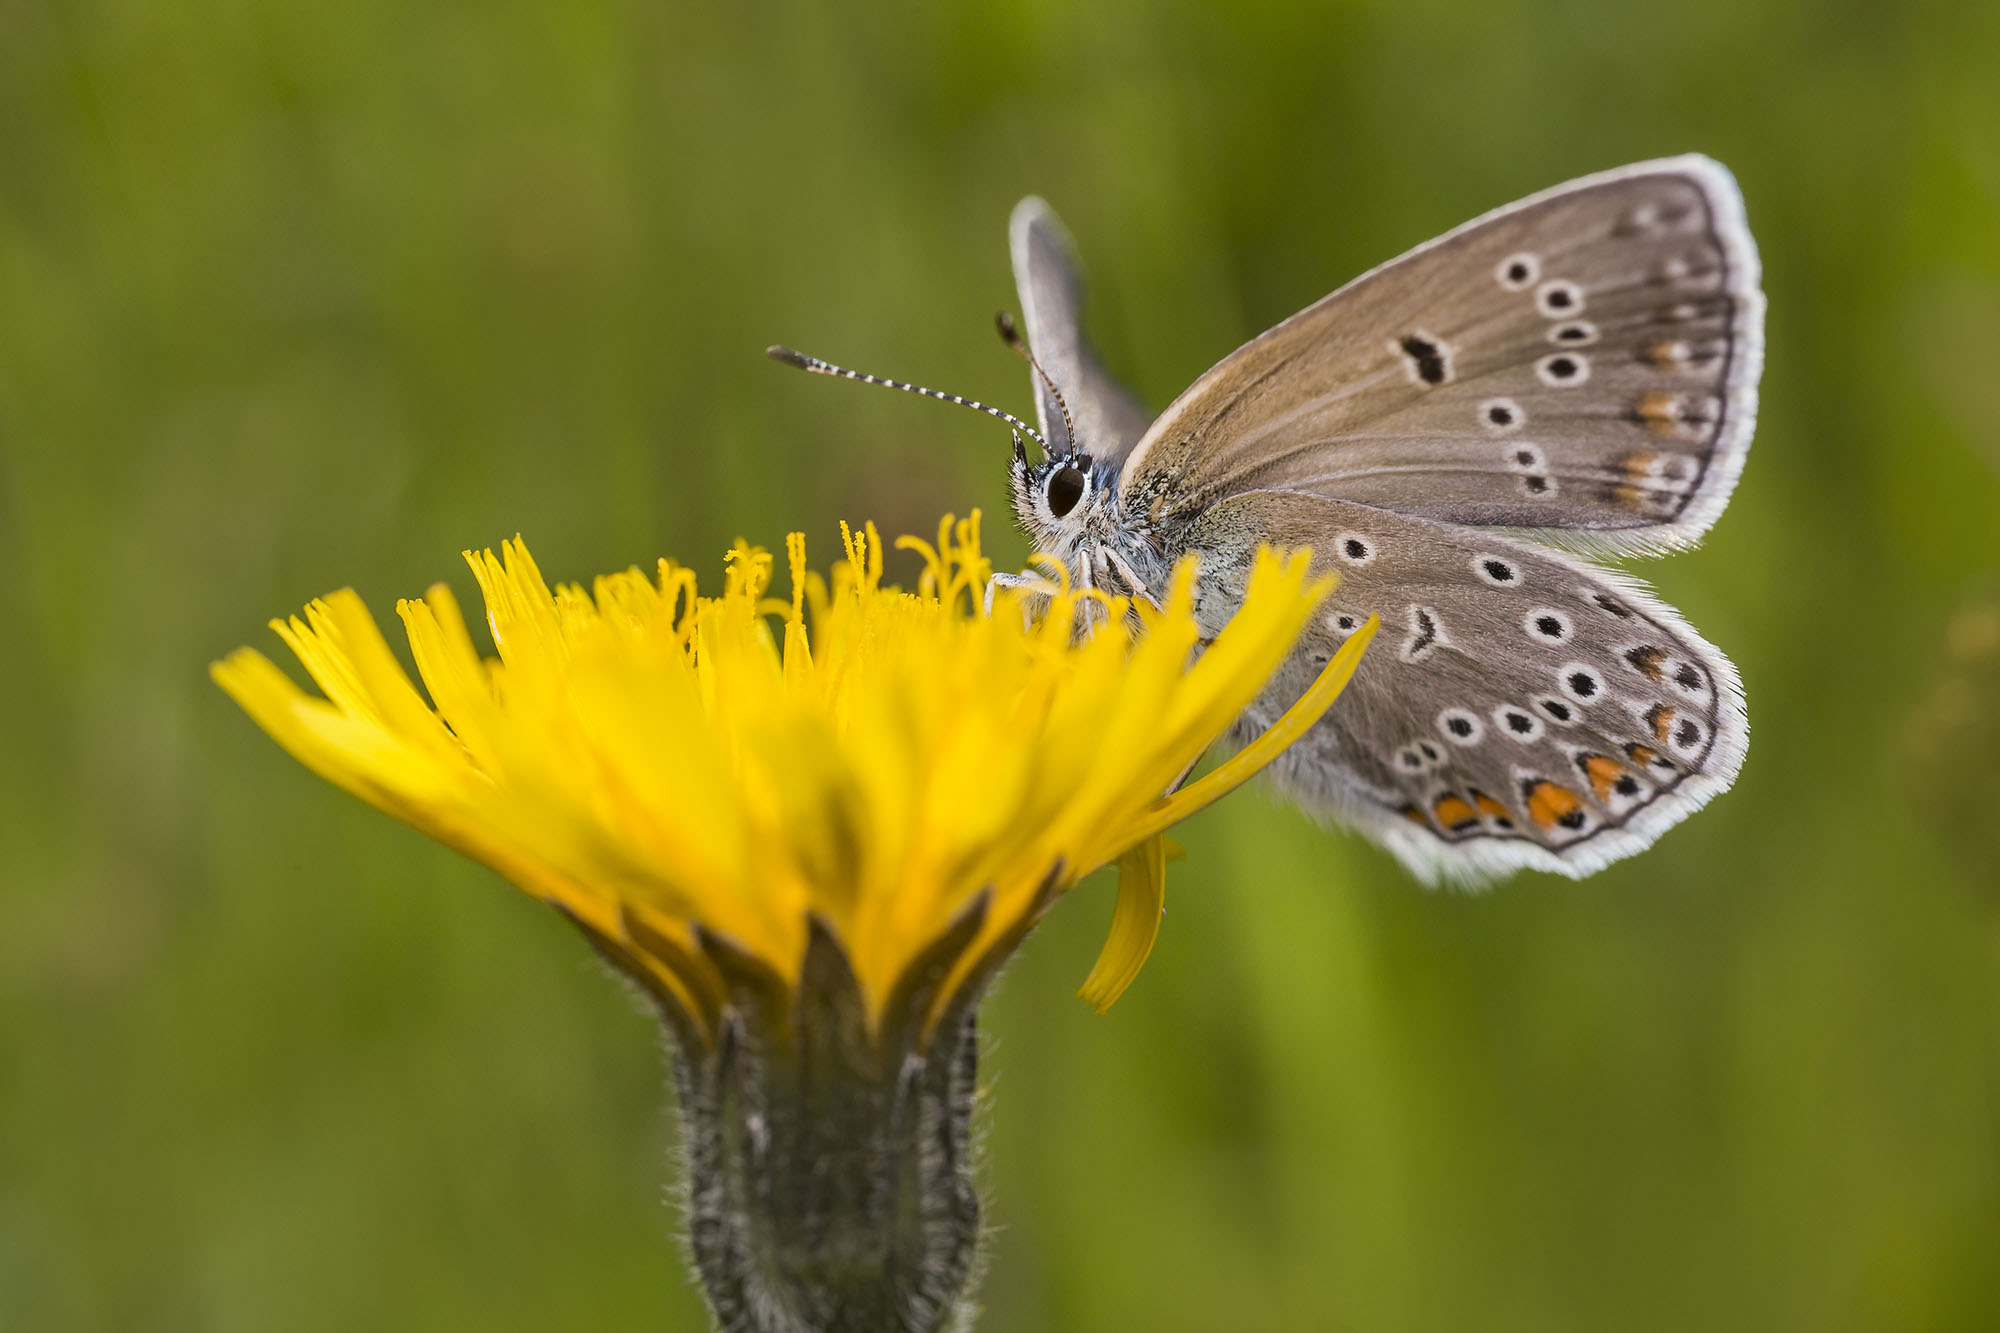 The Silver Studded Blue butterfly resting on a dandelion flower.